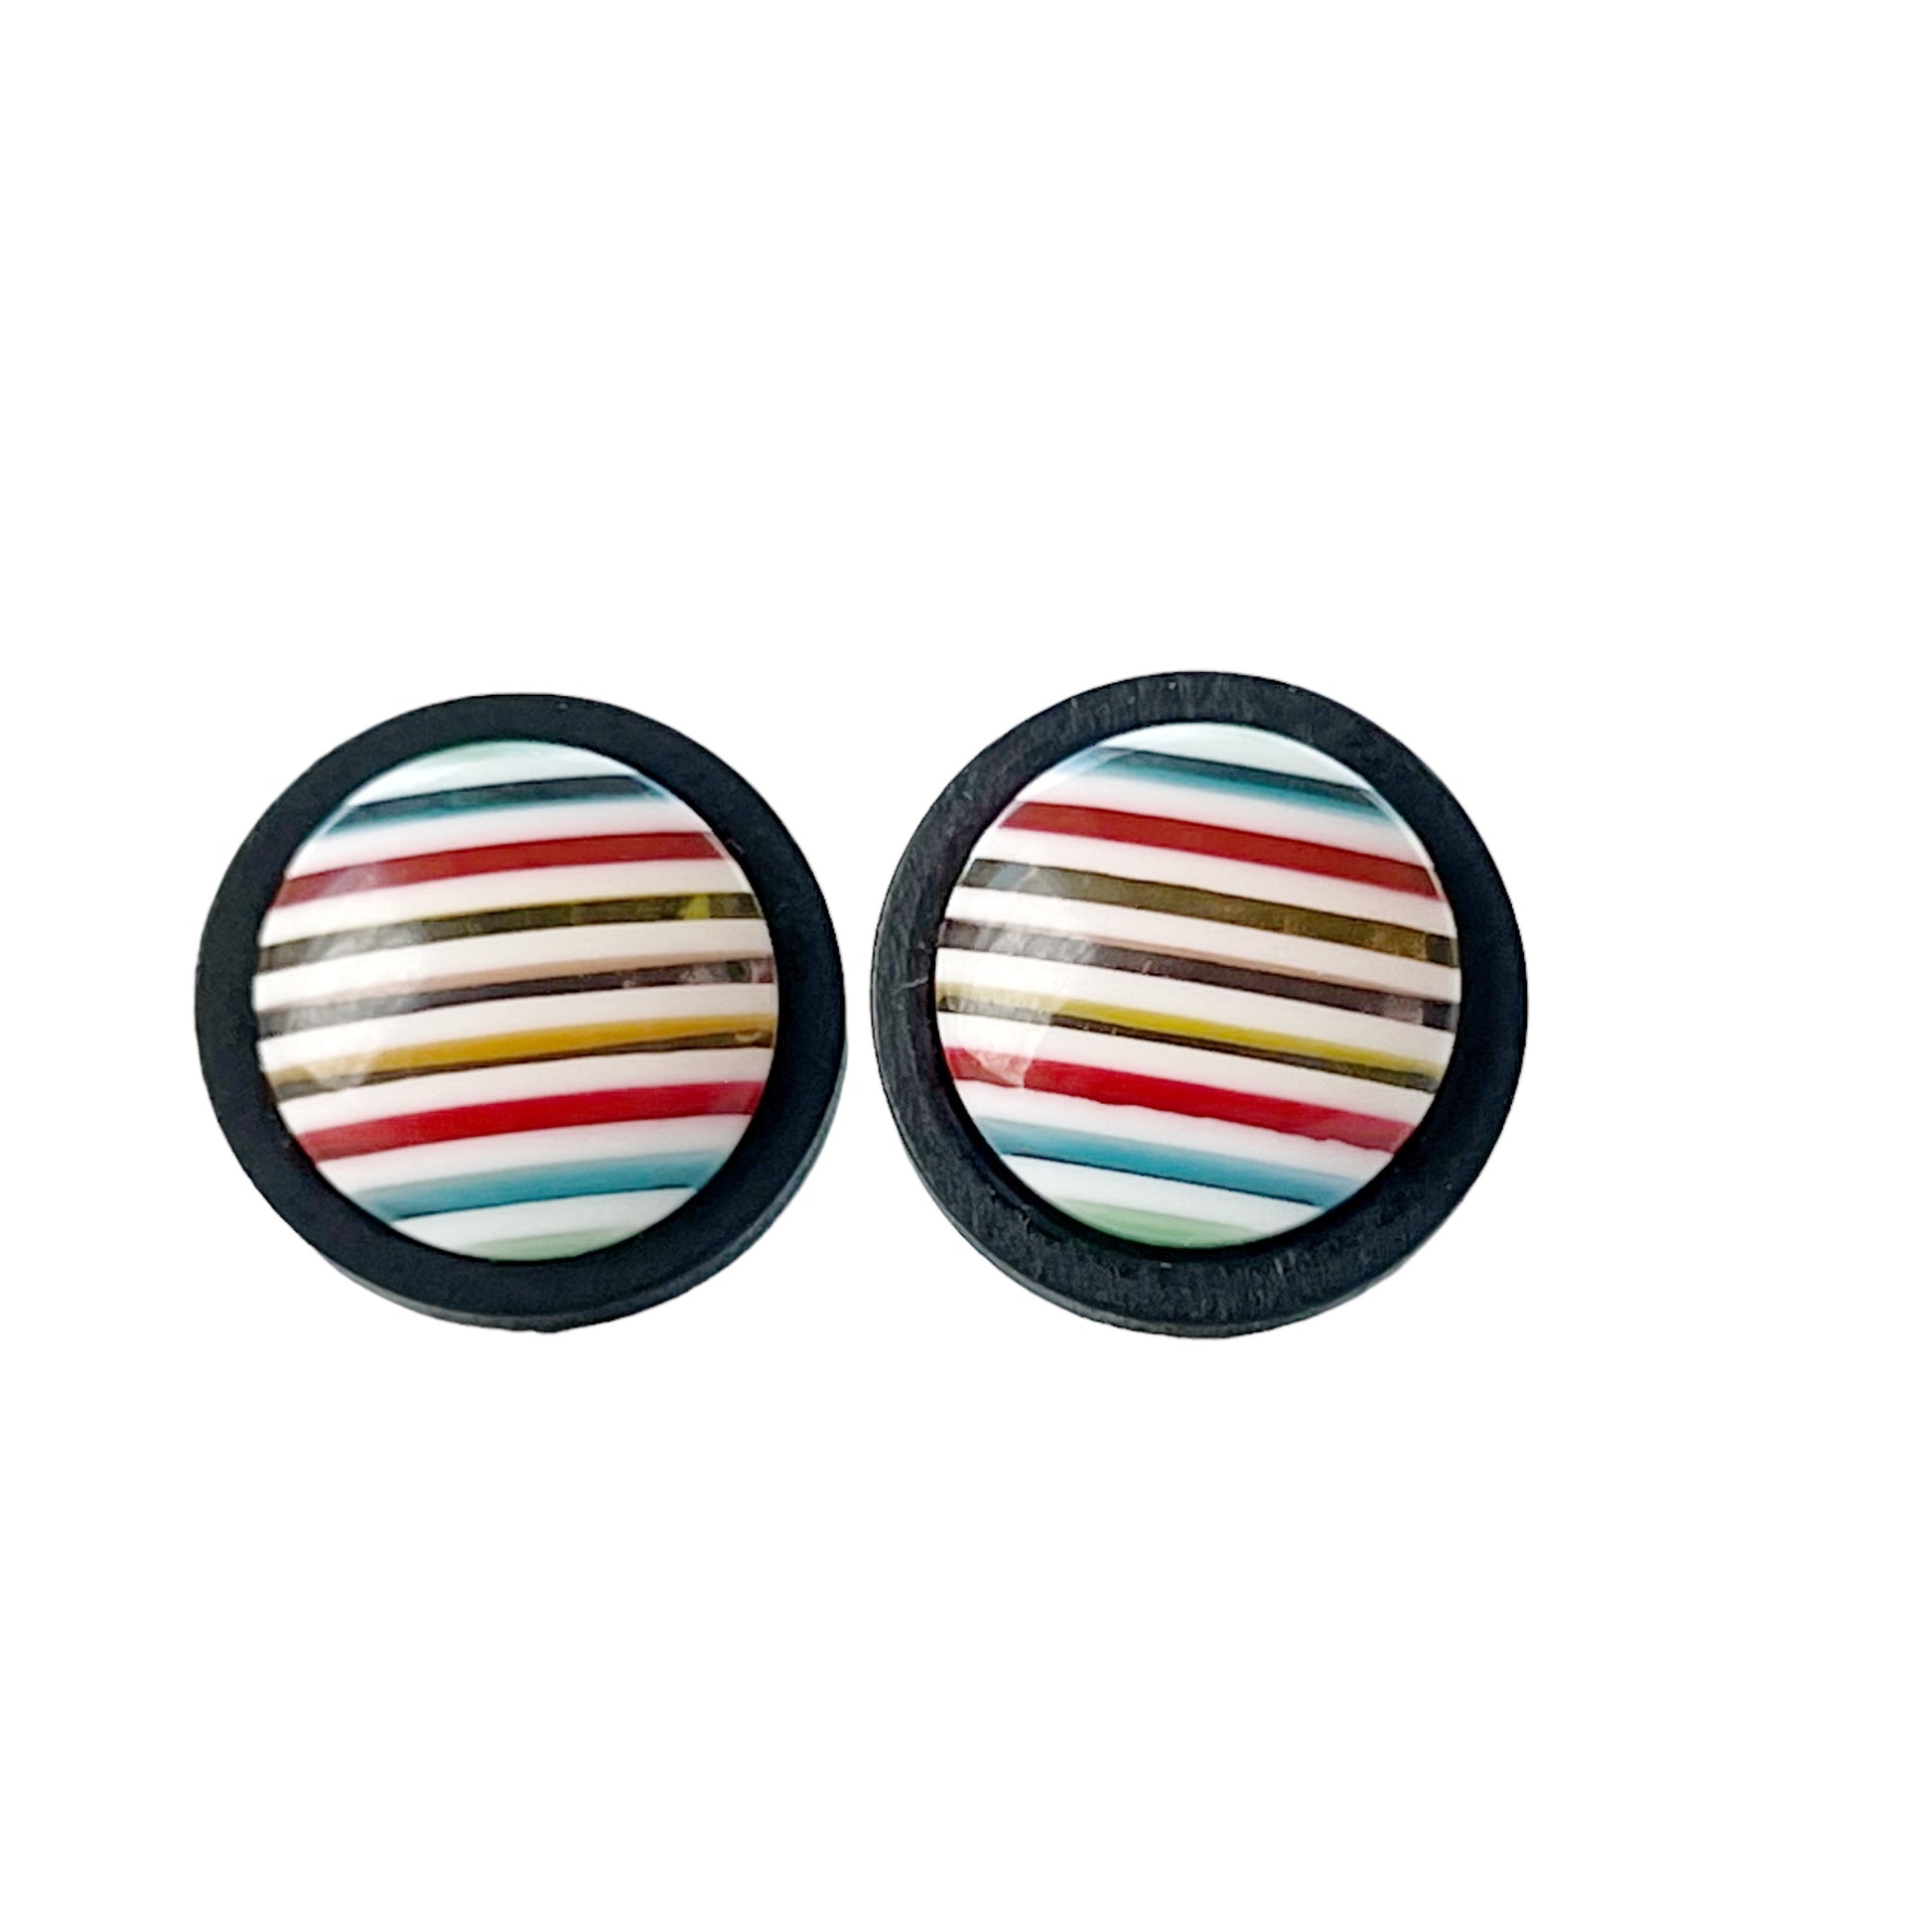 Blue, Red, Yellow Striped Black Wood Stud Earrings - Colorful Unique Accessories